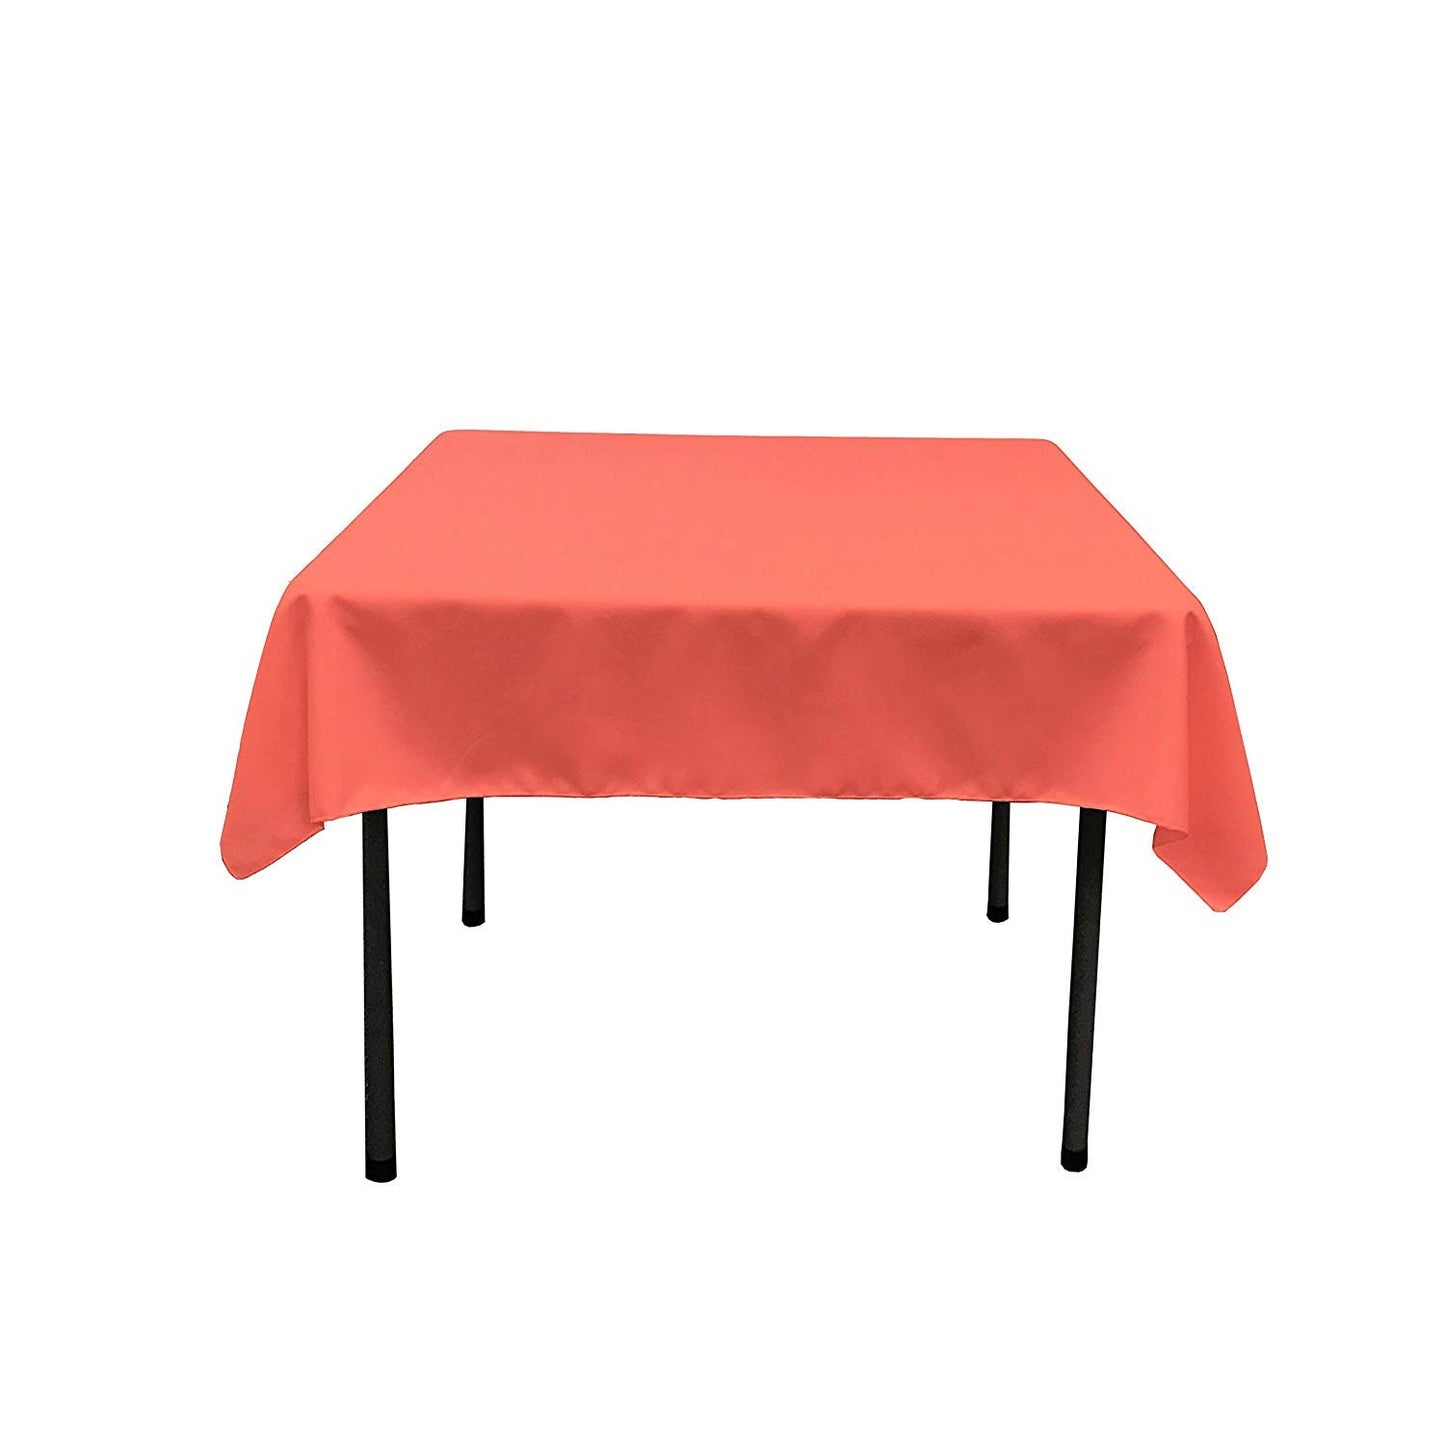 54 x 54-Inch Seamless Coral Rectangular Polyester Tablecloth for Wedding Party Decorations Square Table Cloth Cover